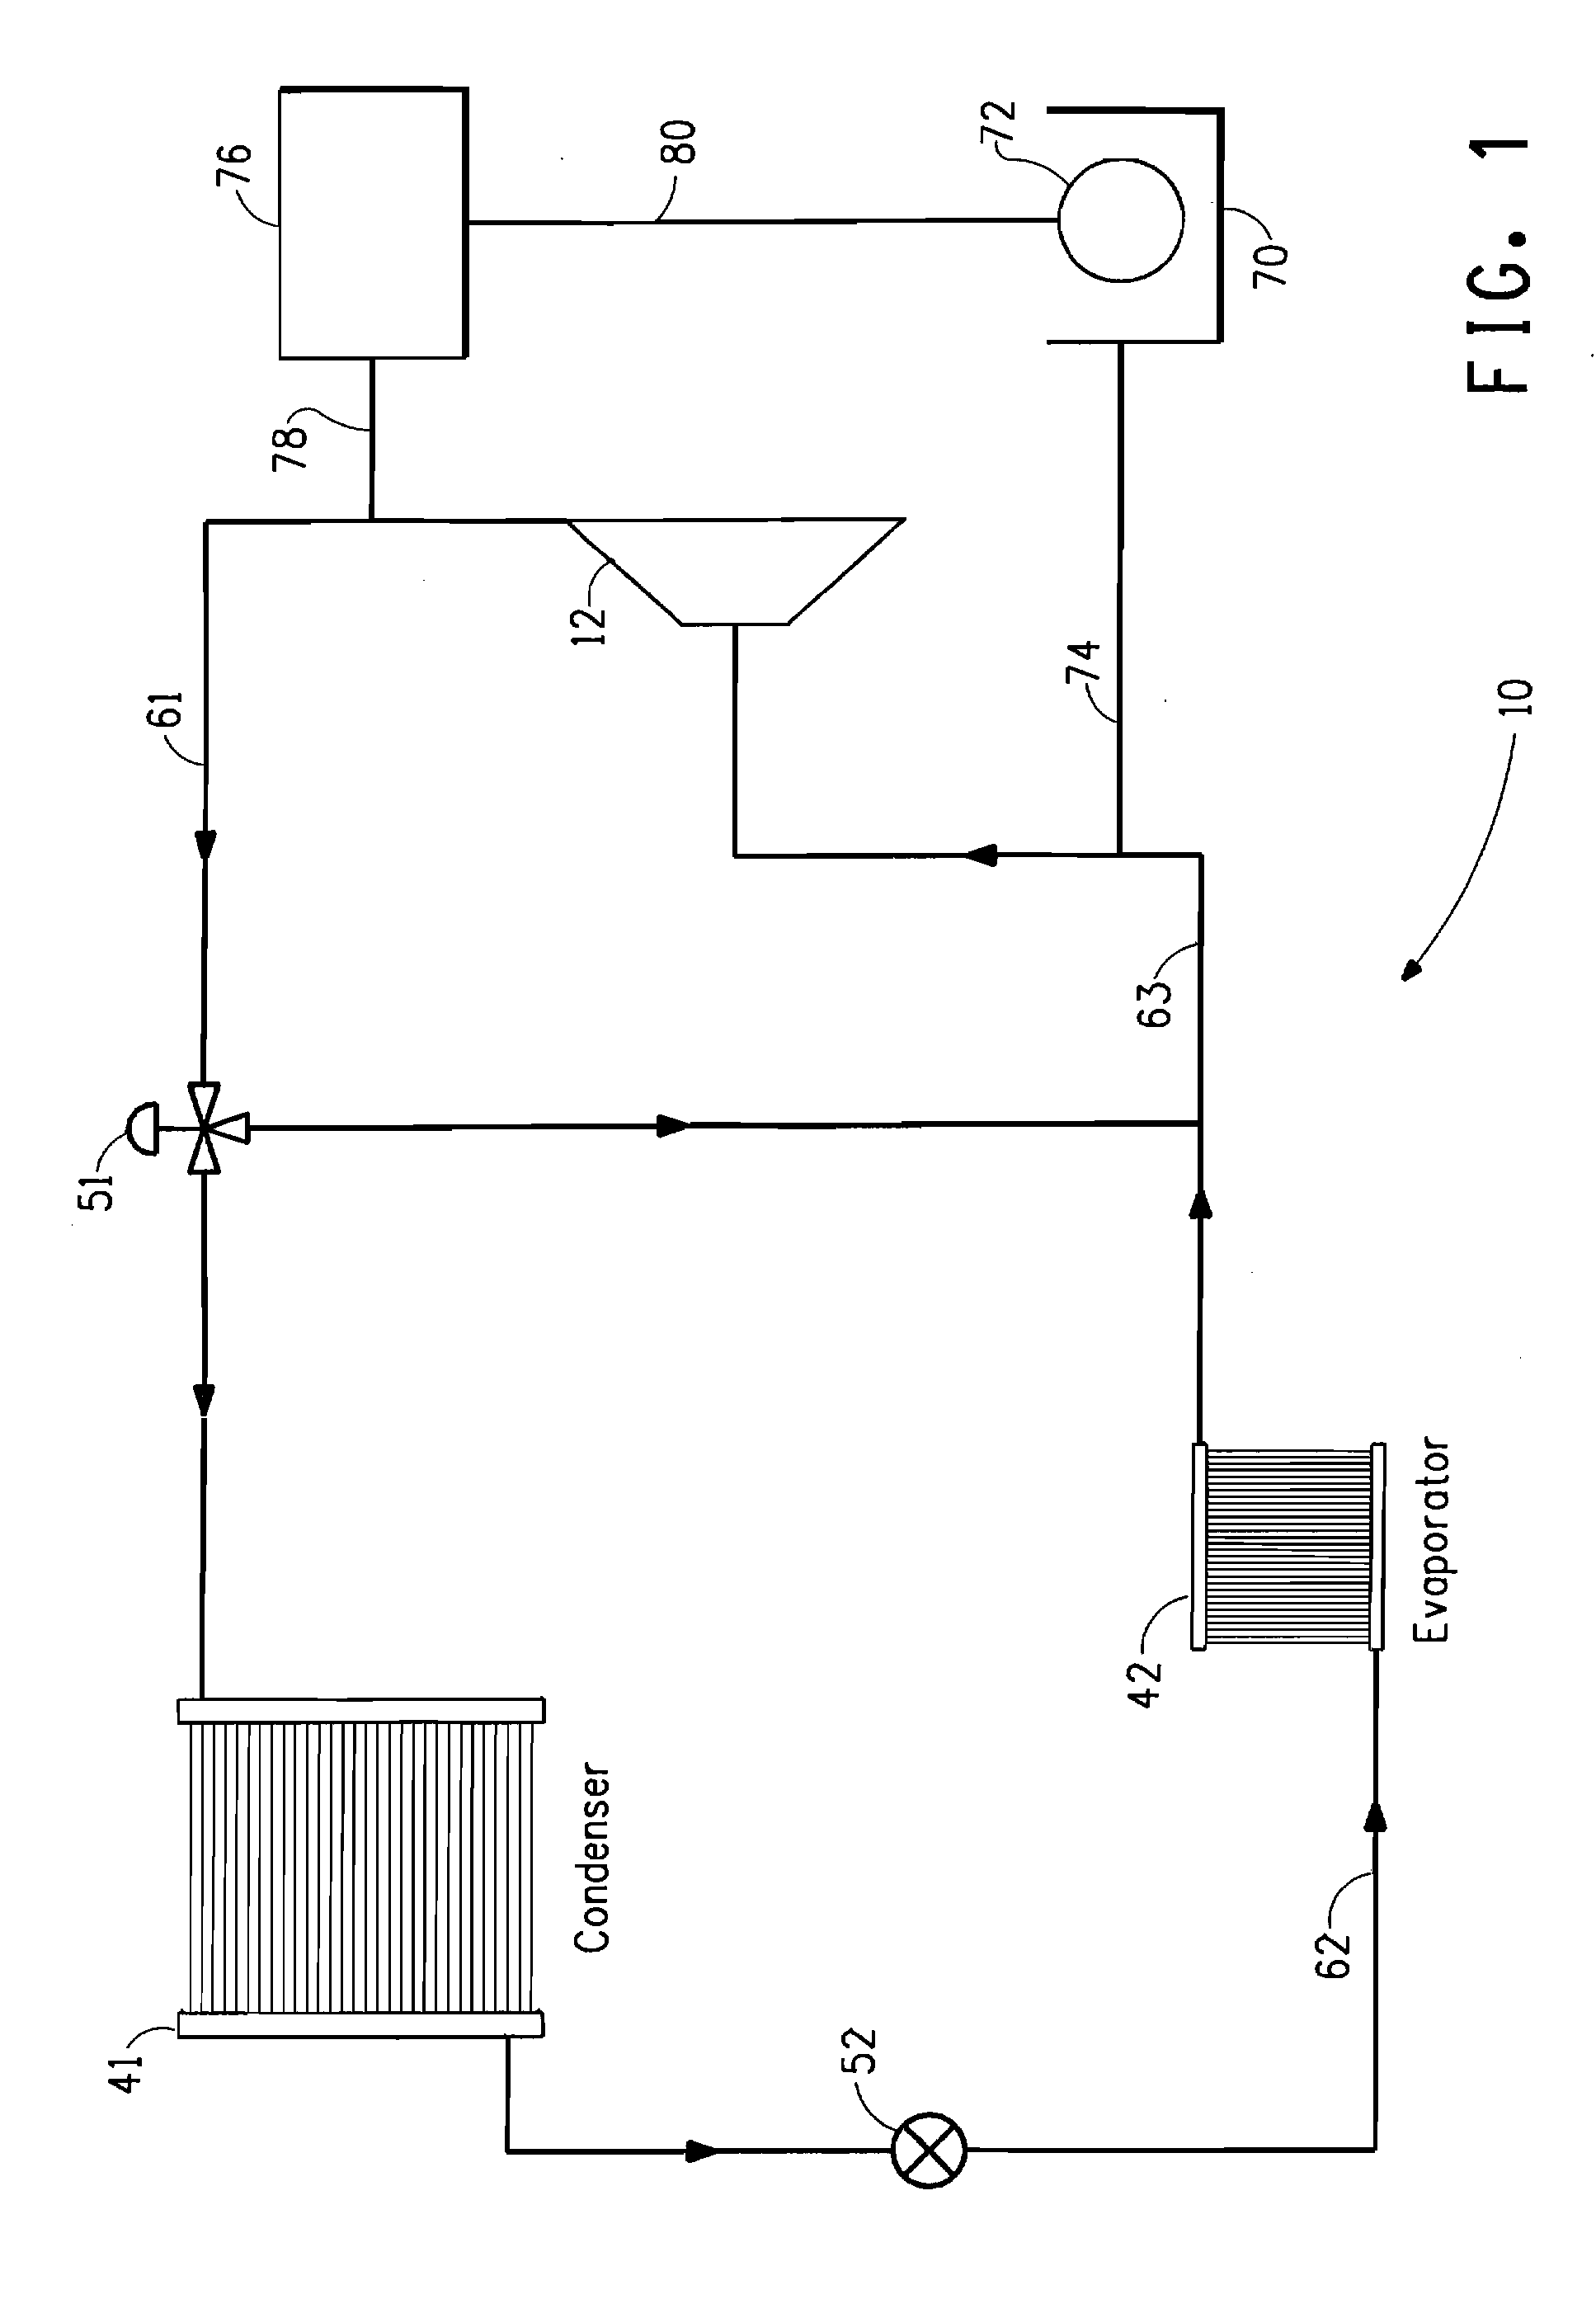 Method of determining the components of a fluoroolefin composition, method of recharging a fluid system in response thereto, and sensors used therefor